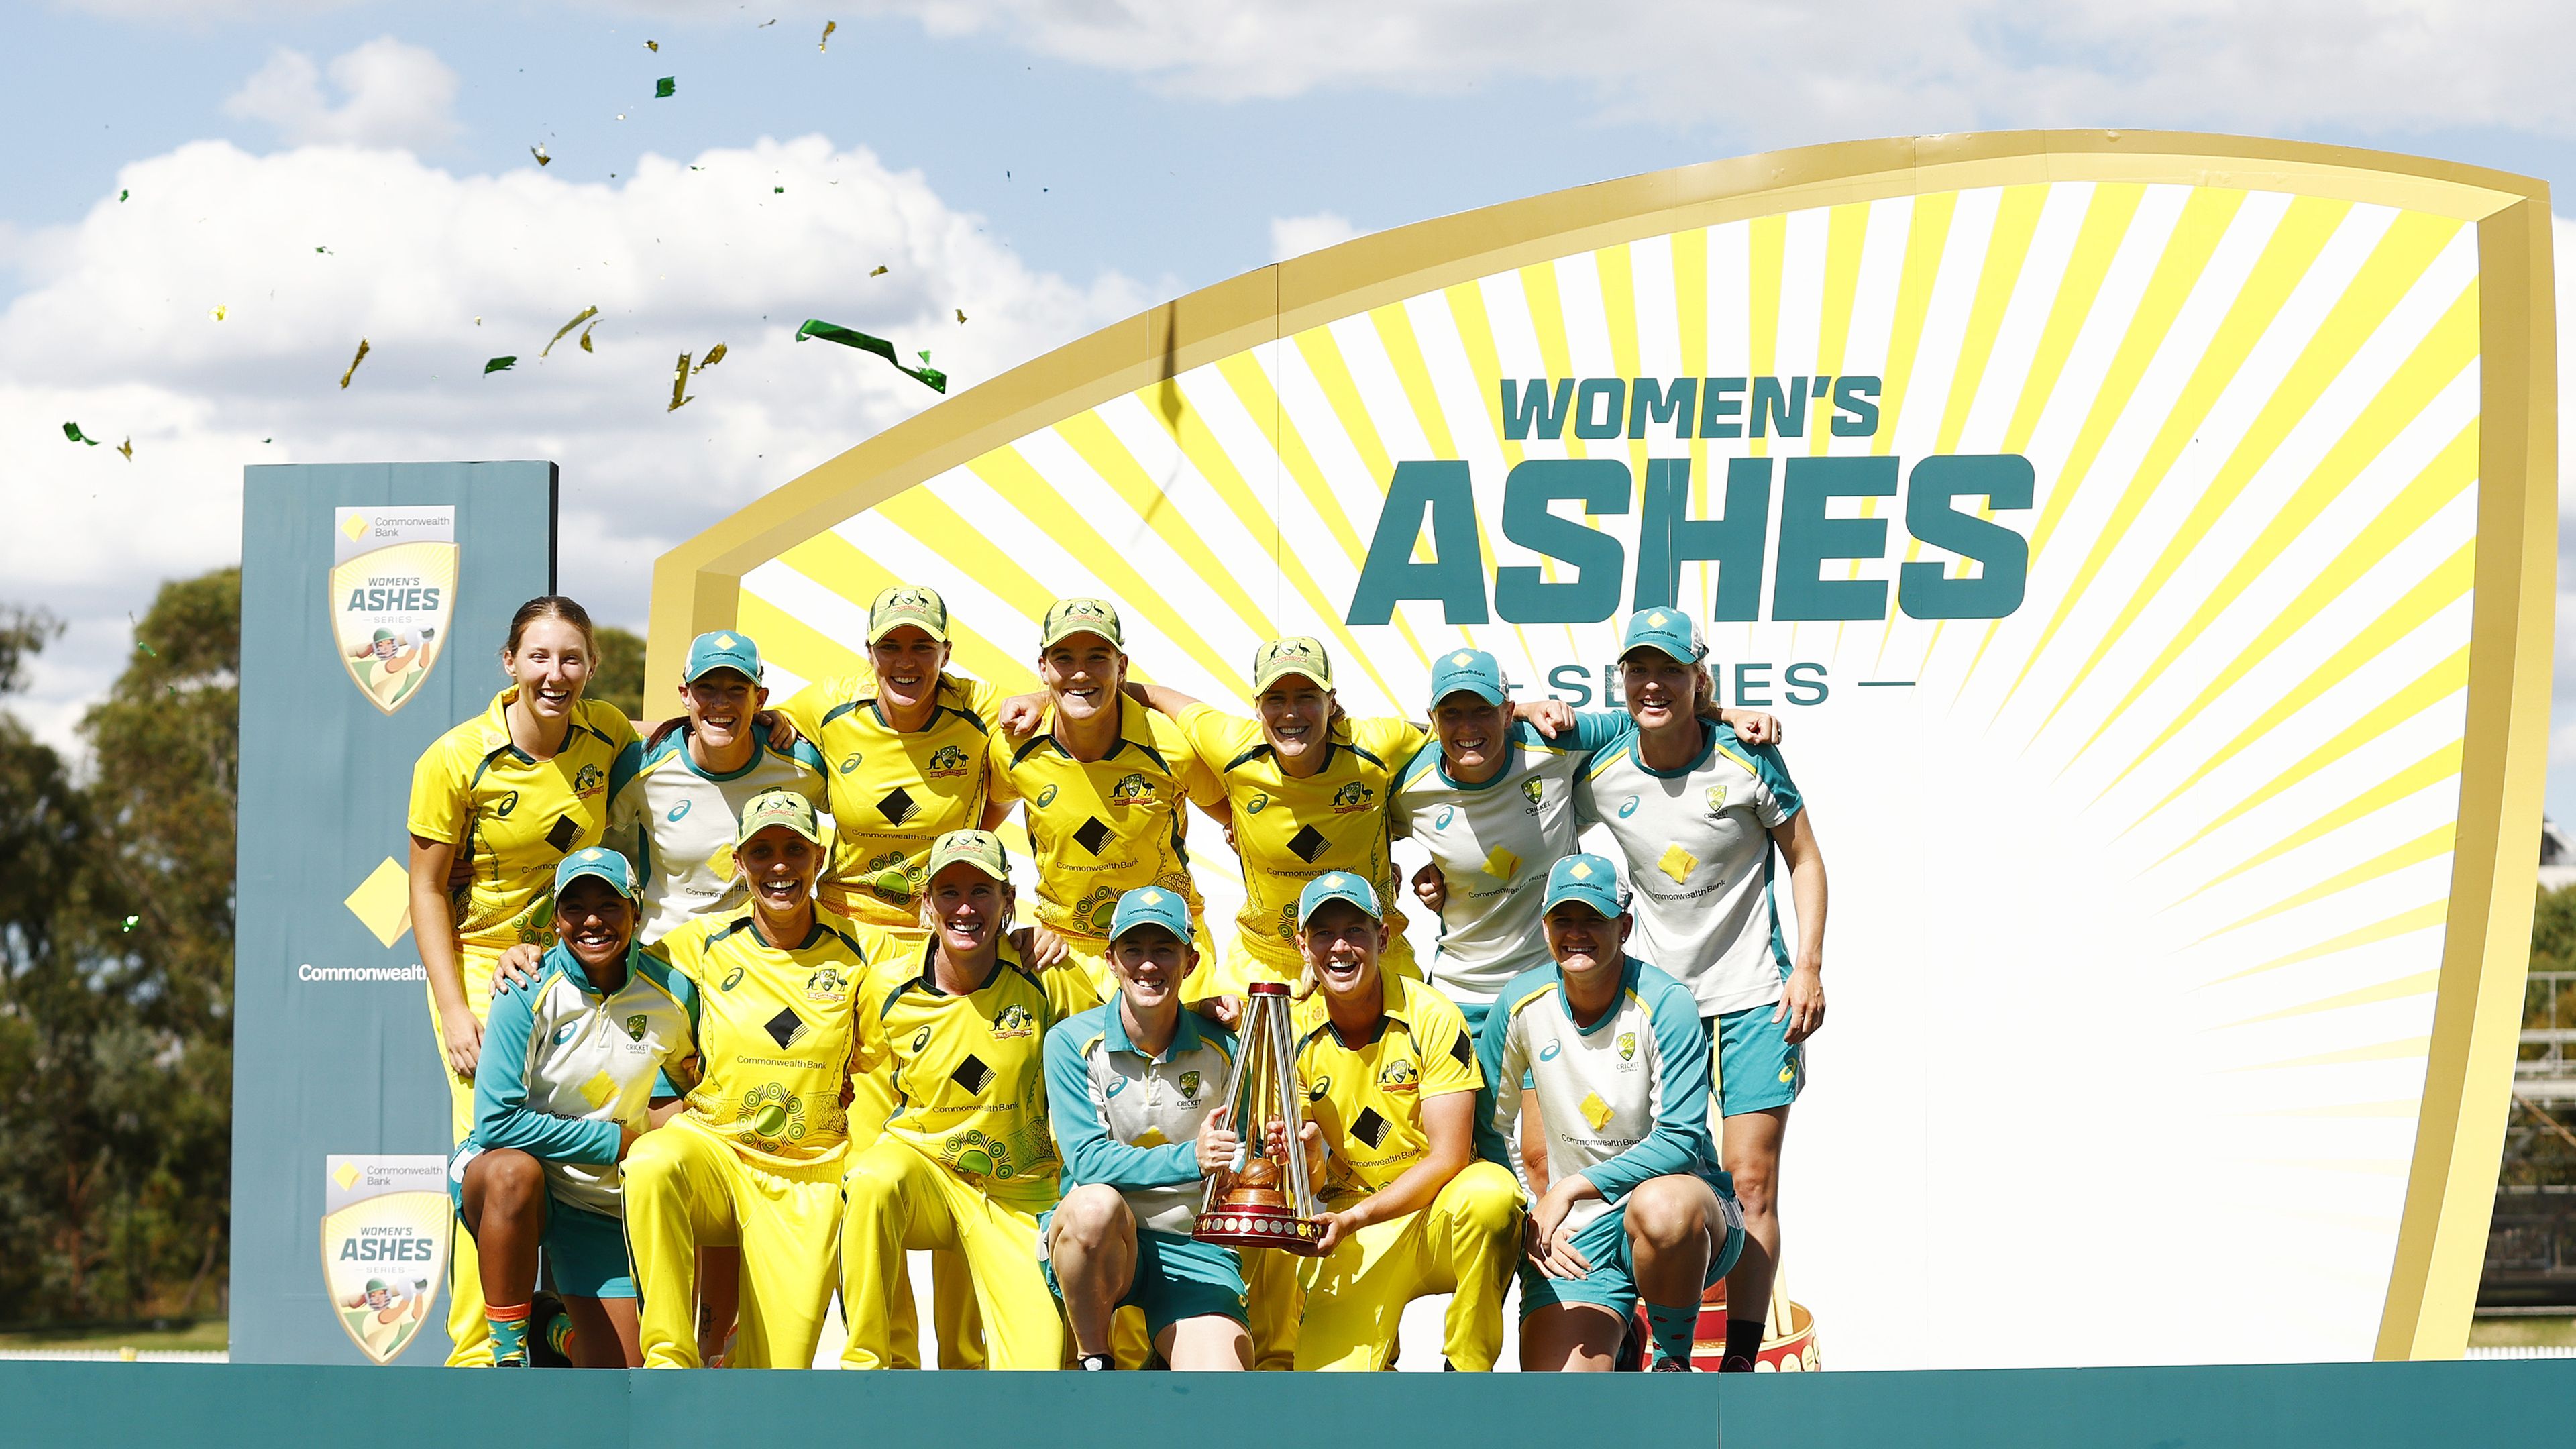 History made in utter Ashes domination as Australia go undefeated, England's summer ends 0-14